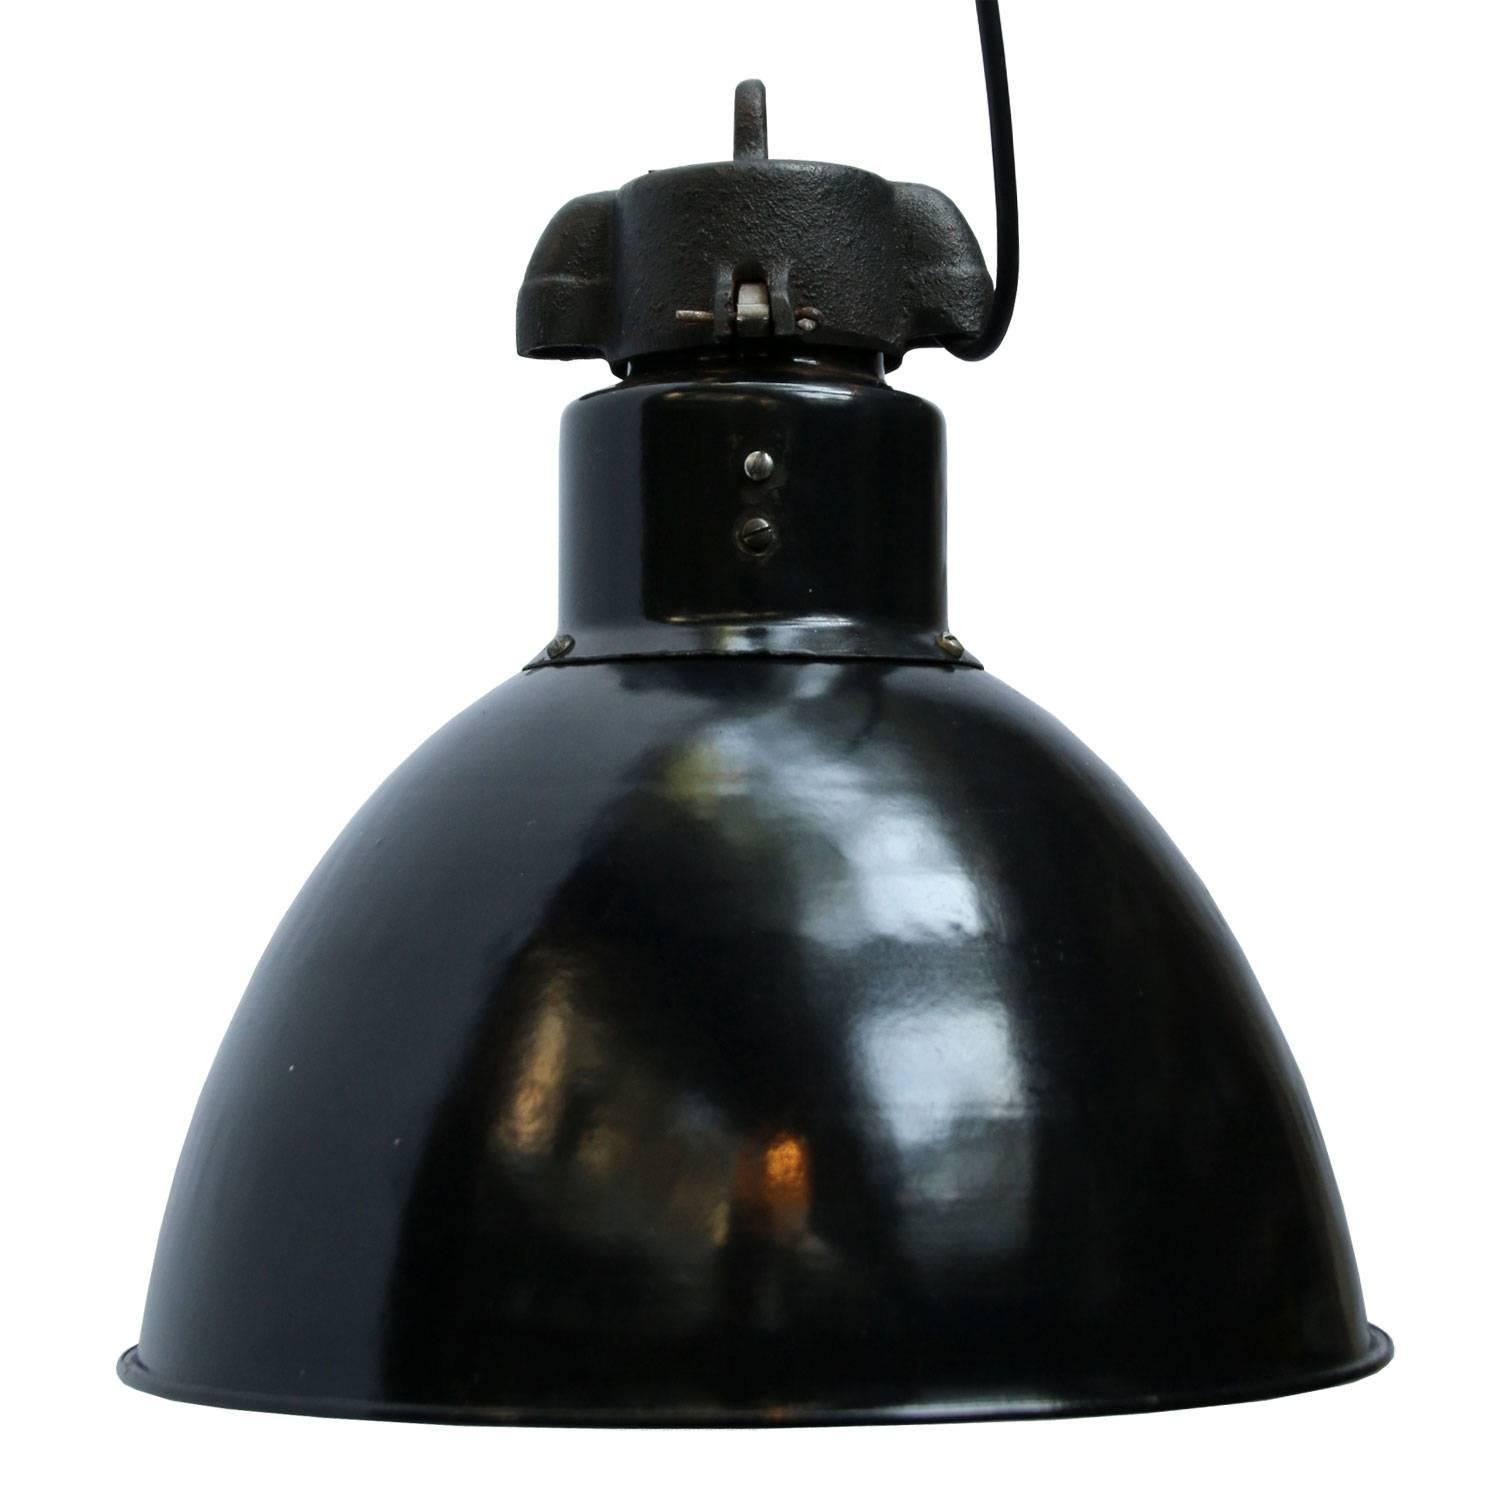 Bauhaus classic from the 1930s, Black enamel industrial hanging lamp.
Cast iron top. White interior. (100 pieces in stock).

All lamps have been made suitable by international standards for incandescent light bulbs, energy-efficient and LED bulbs